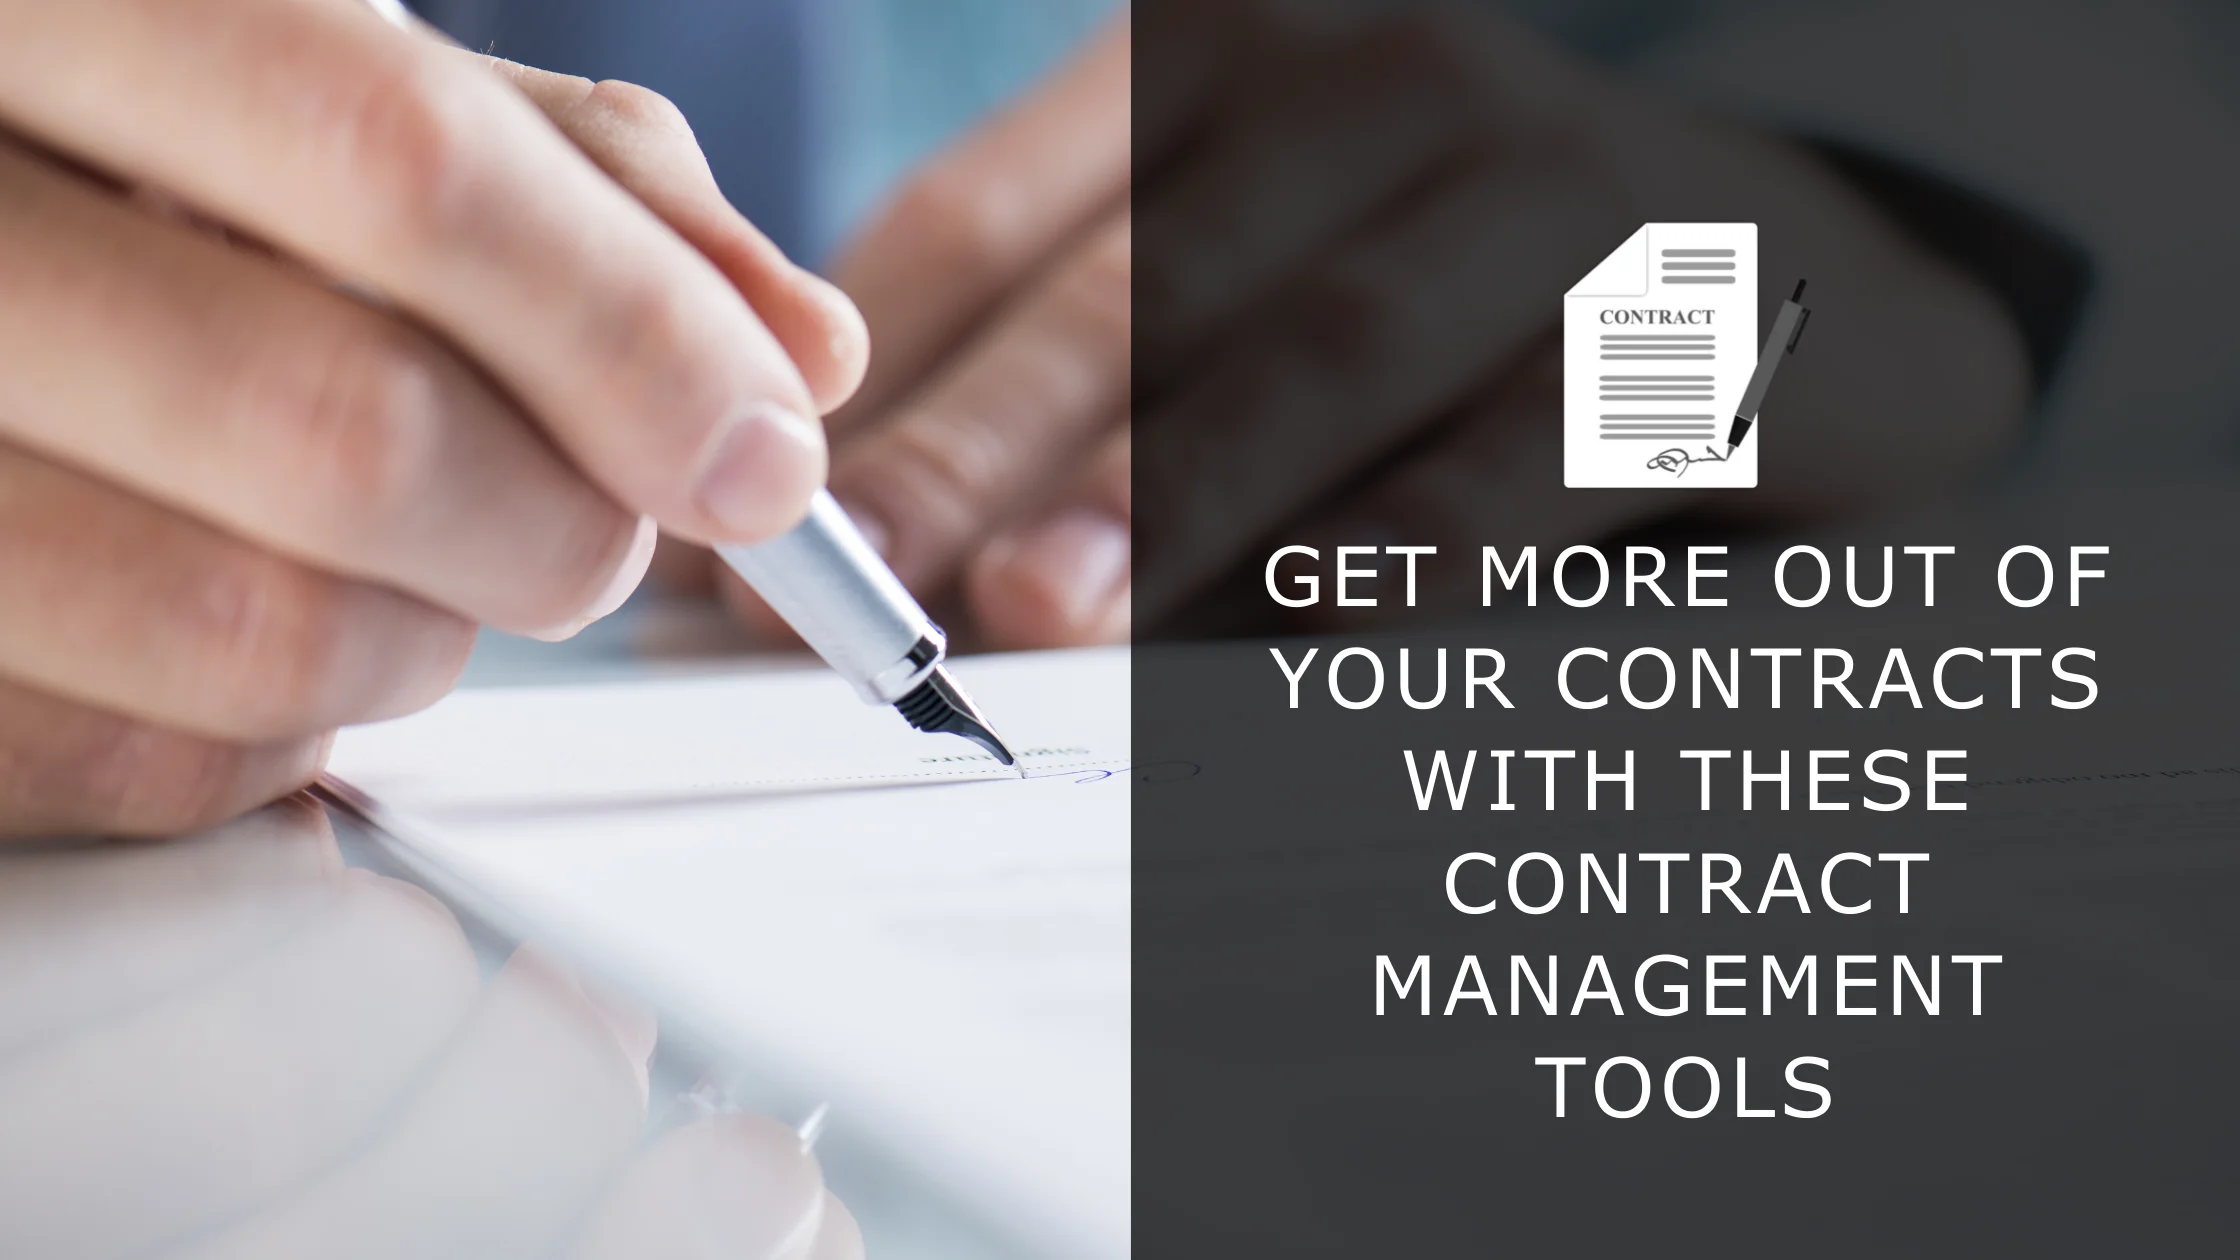 Get more out of your contracts with these contract management tools